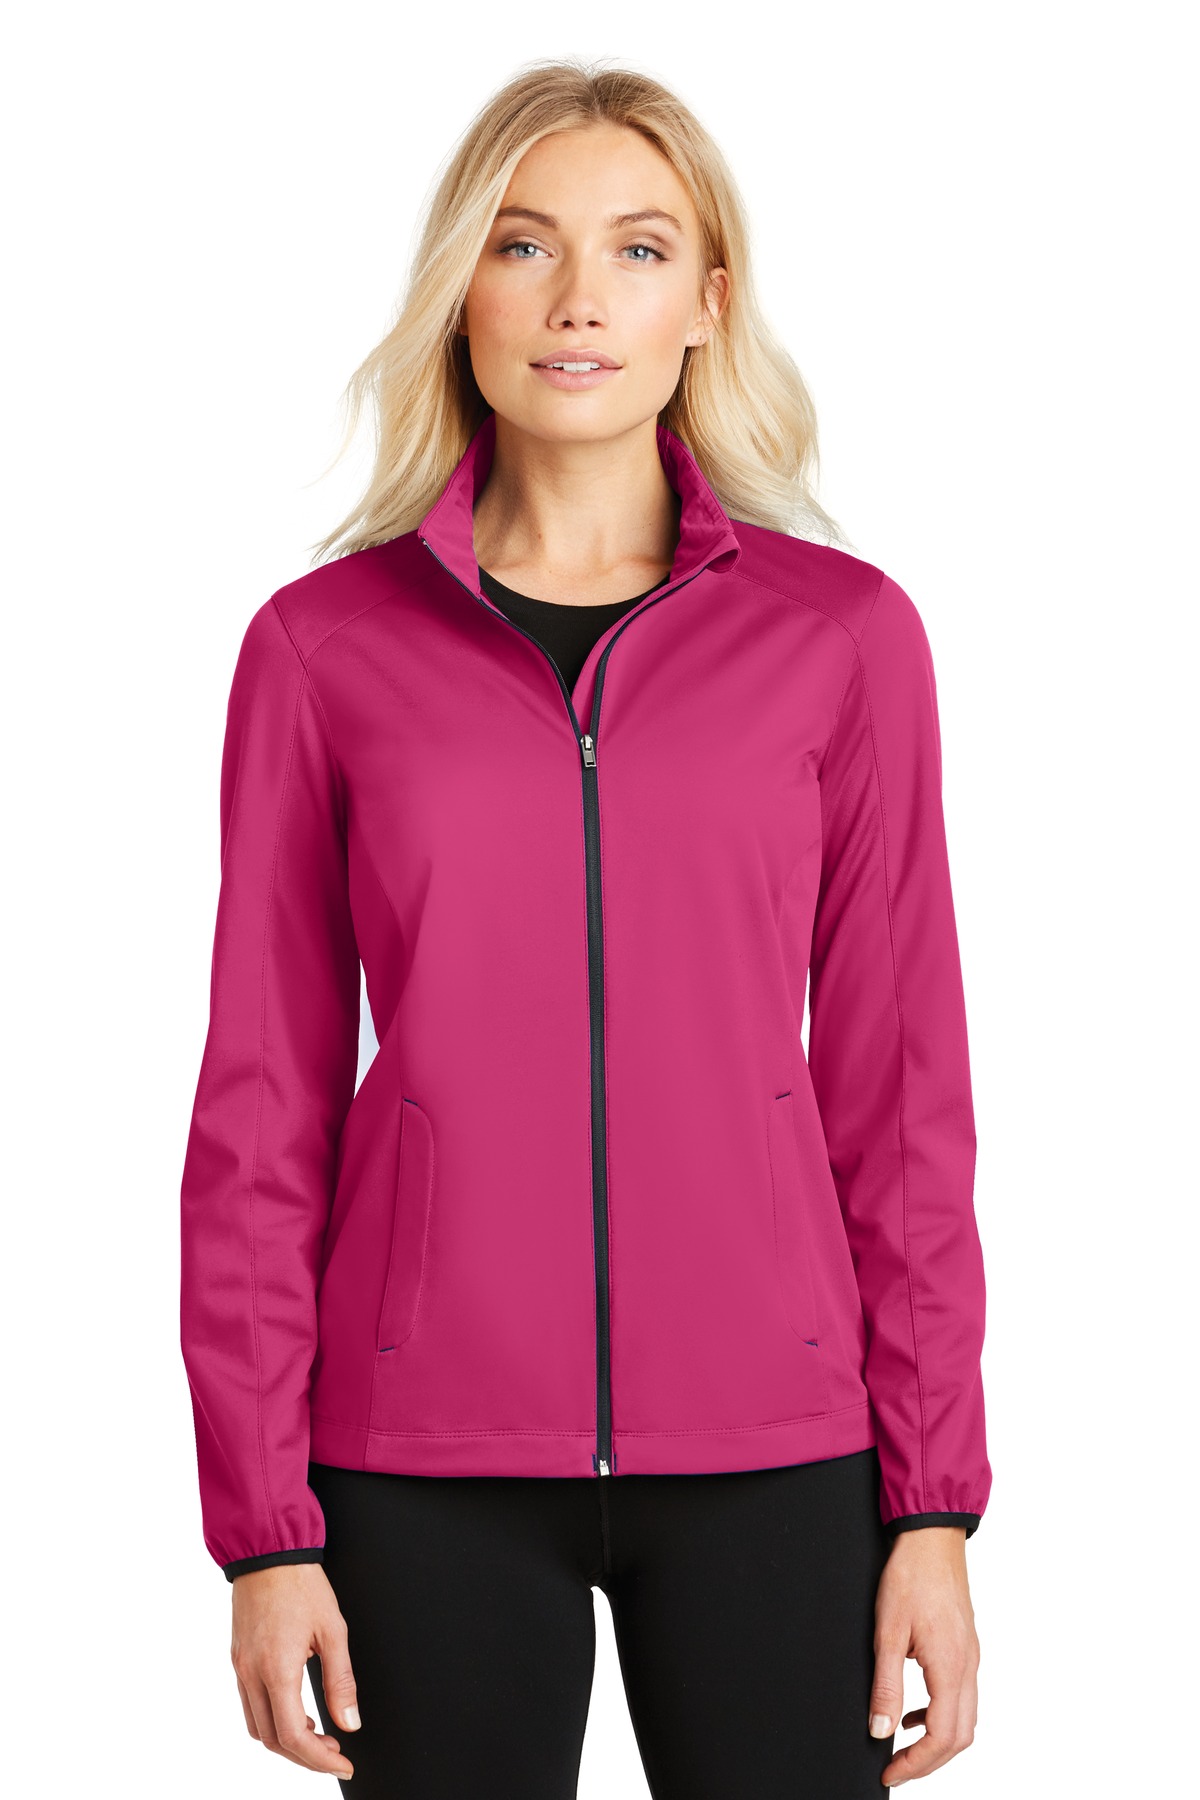 Port Authority Ladies Active Soft Shell Jacket. L717 - image 1 of 1